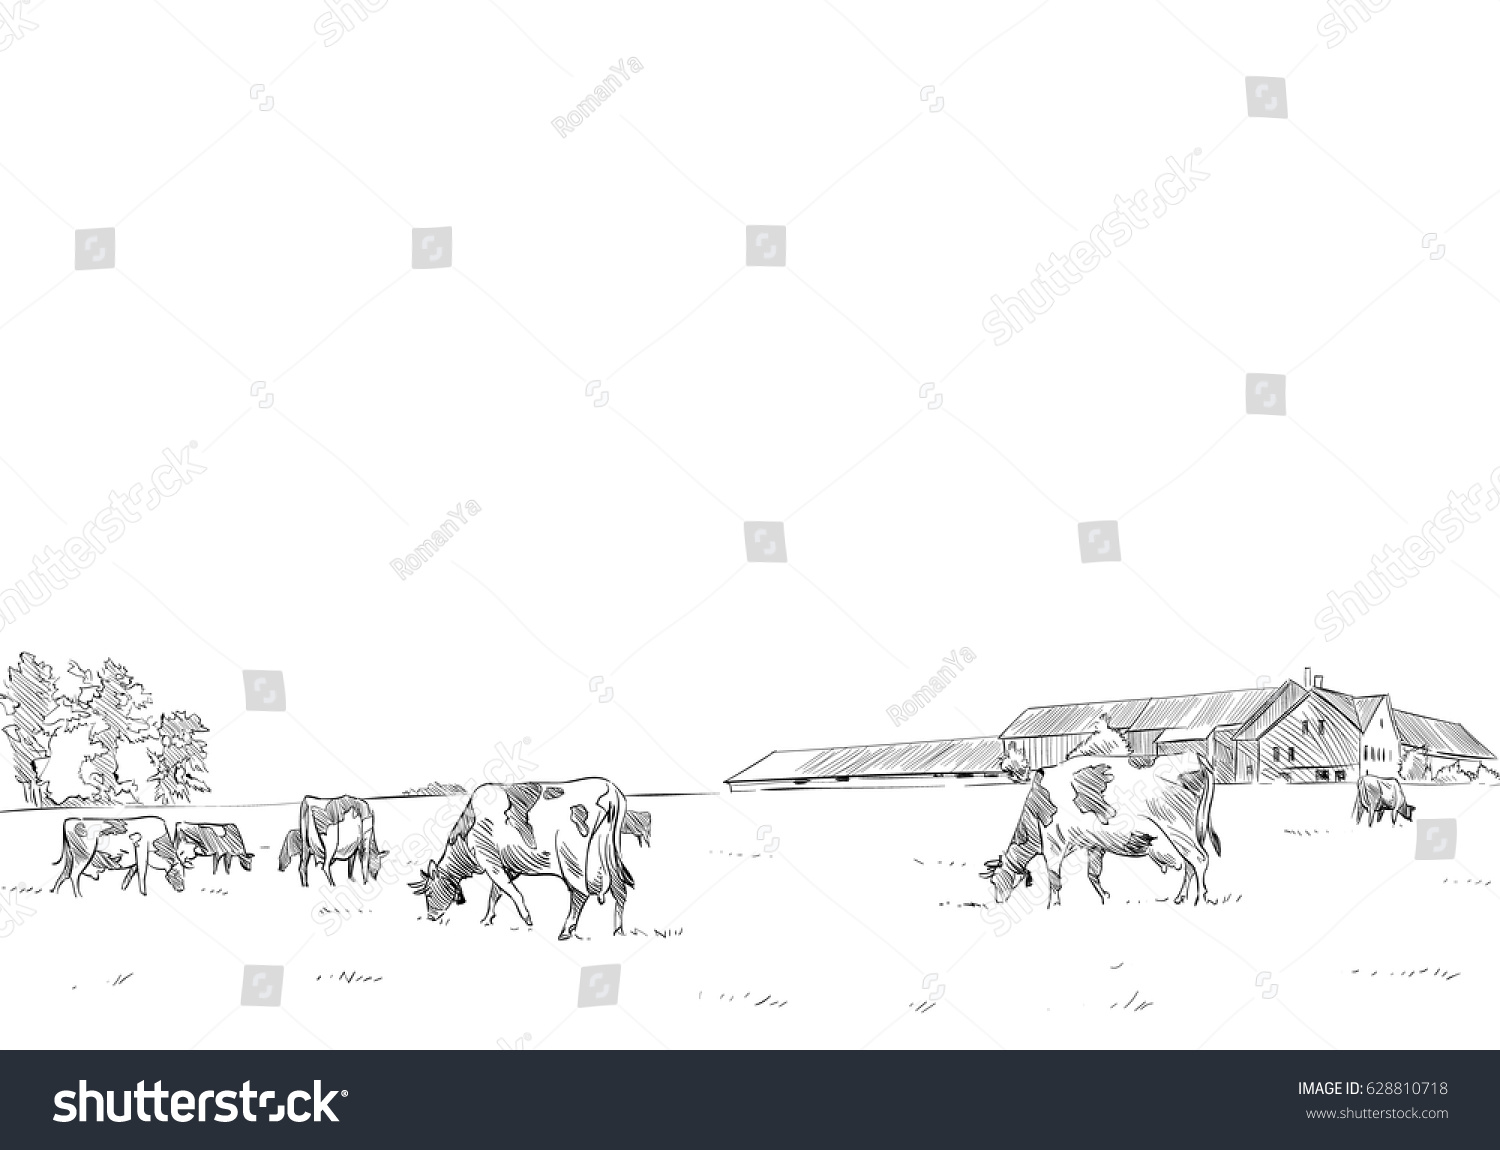 Cows are grazing in a meadow. Rural landscape. Farm sketch hand drawn vector illustration.  #628810718